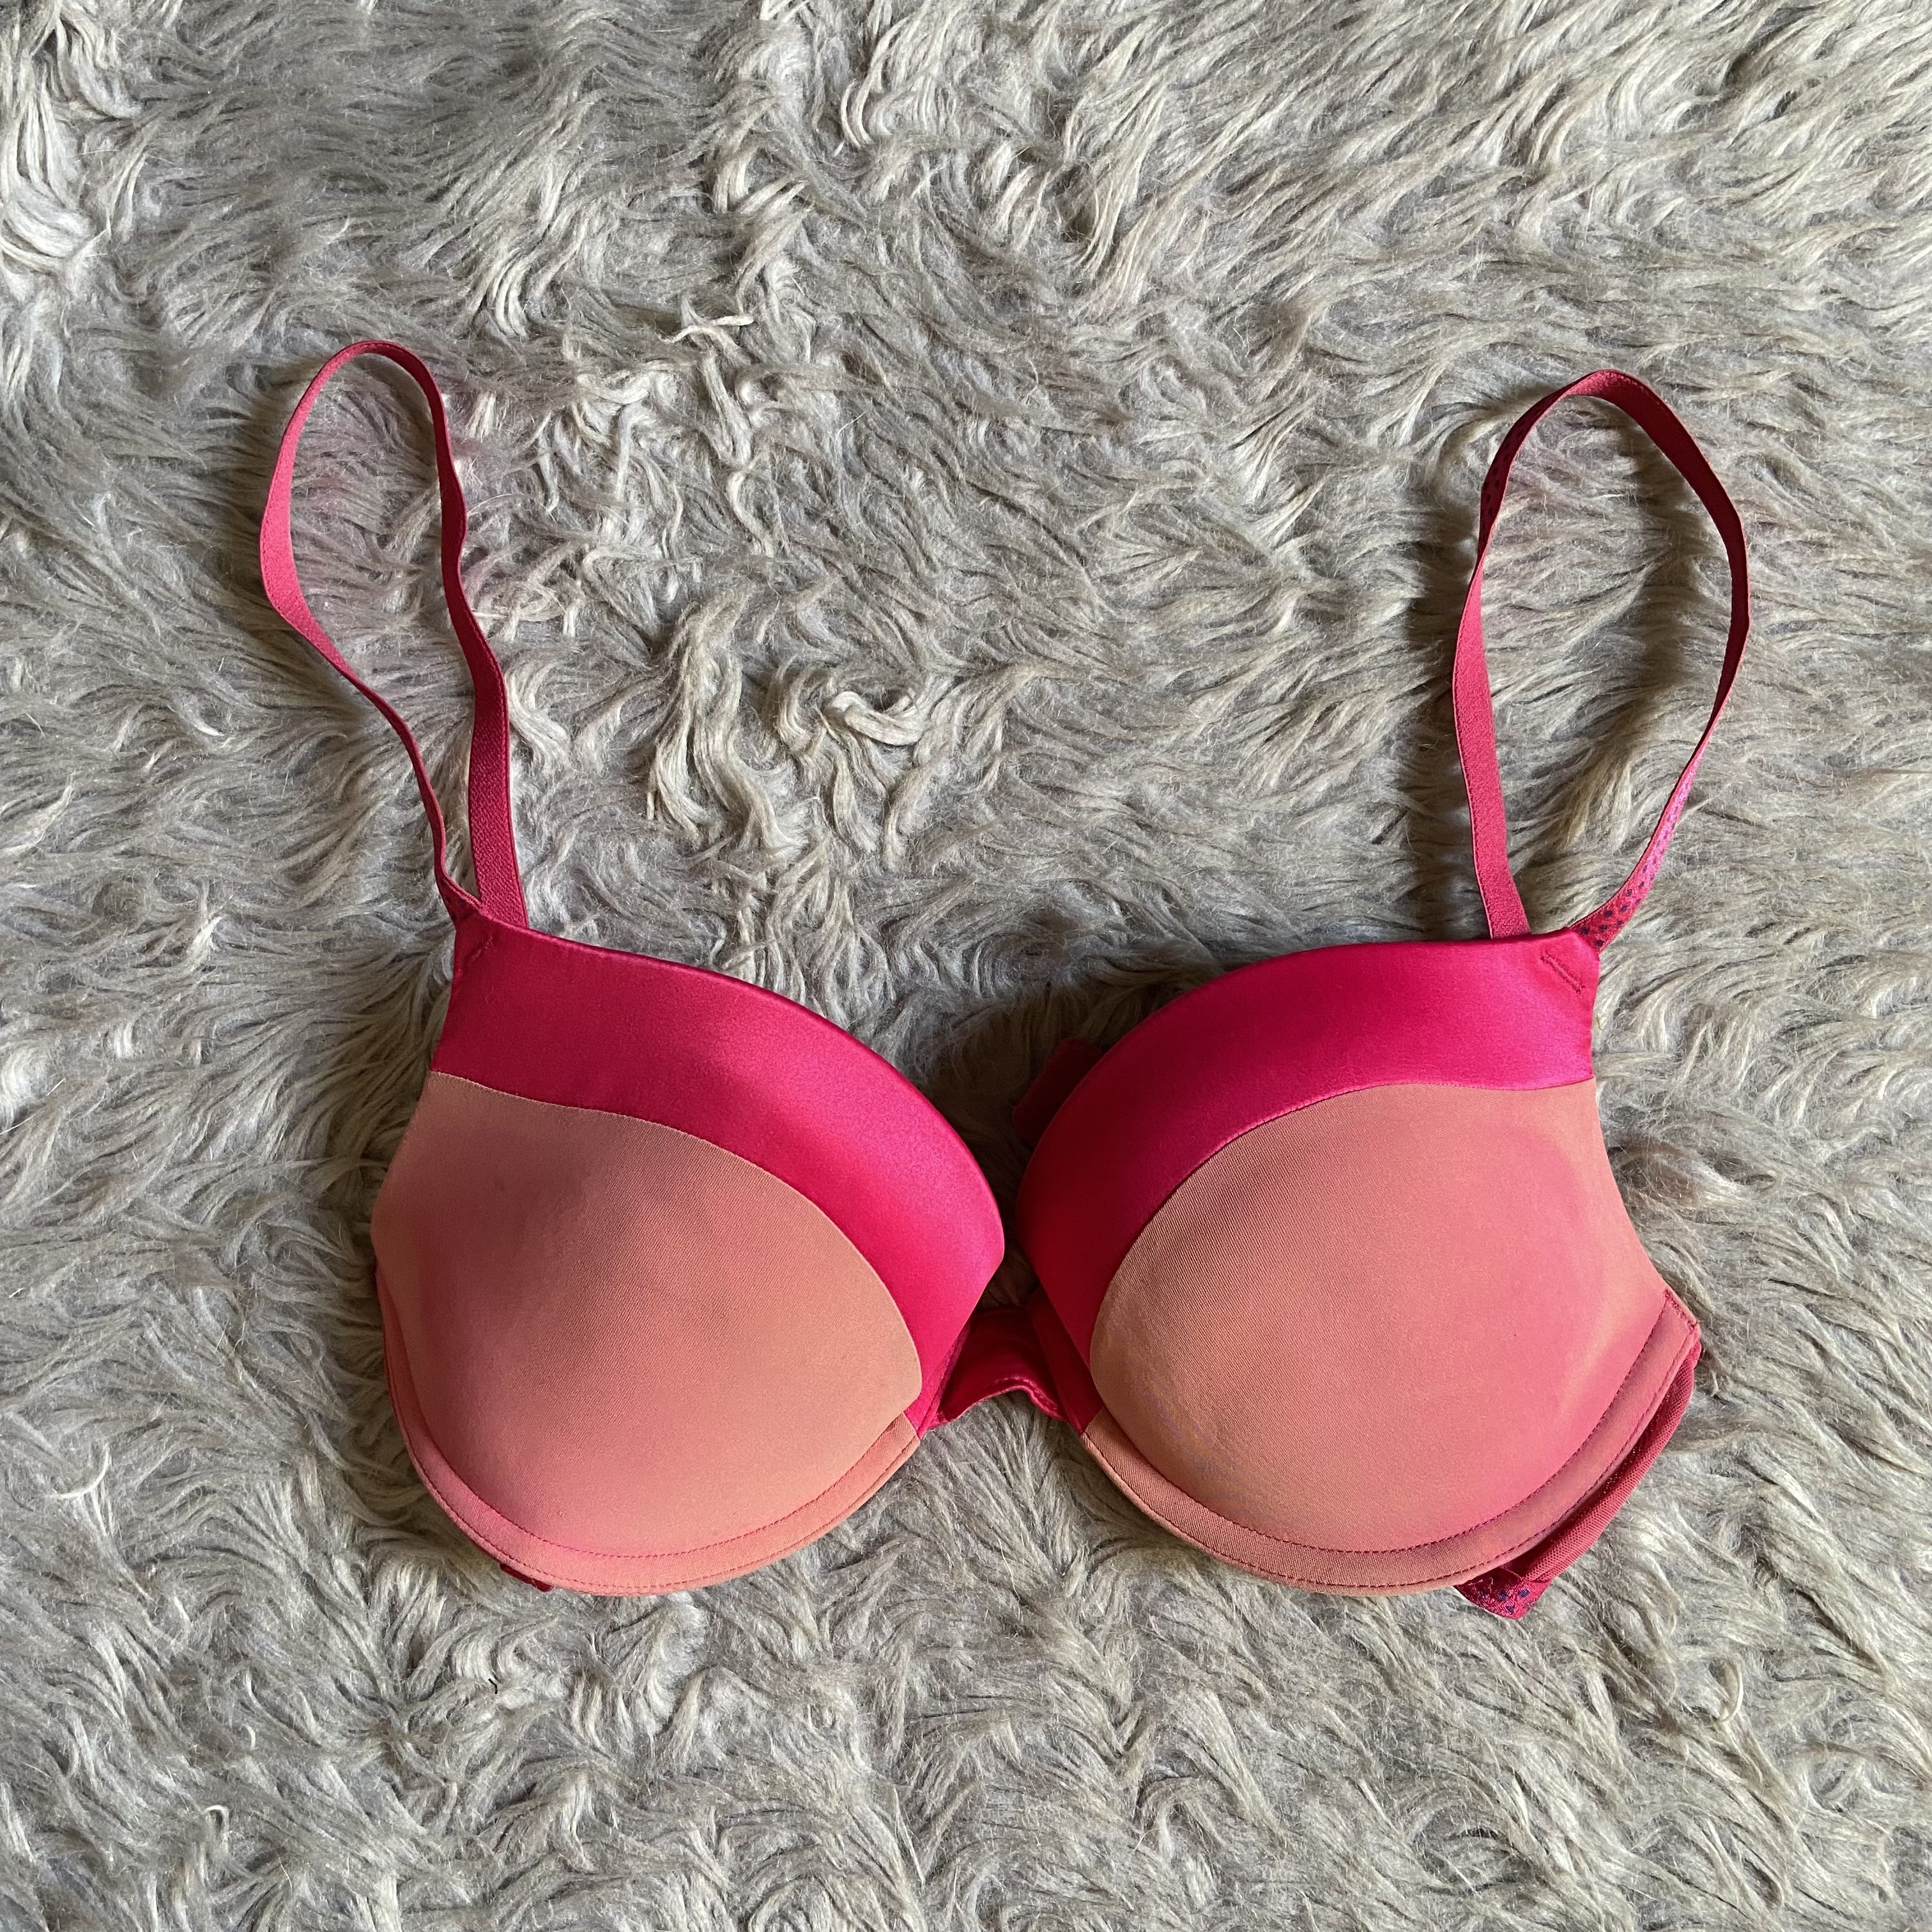 https://media.karousell.com/media/photos/products/2022/4/21/marks__spencer_pink_push_up_br_1650531675_ac21f1ac.jpg